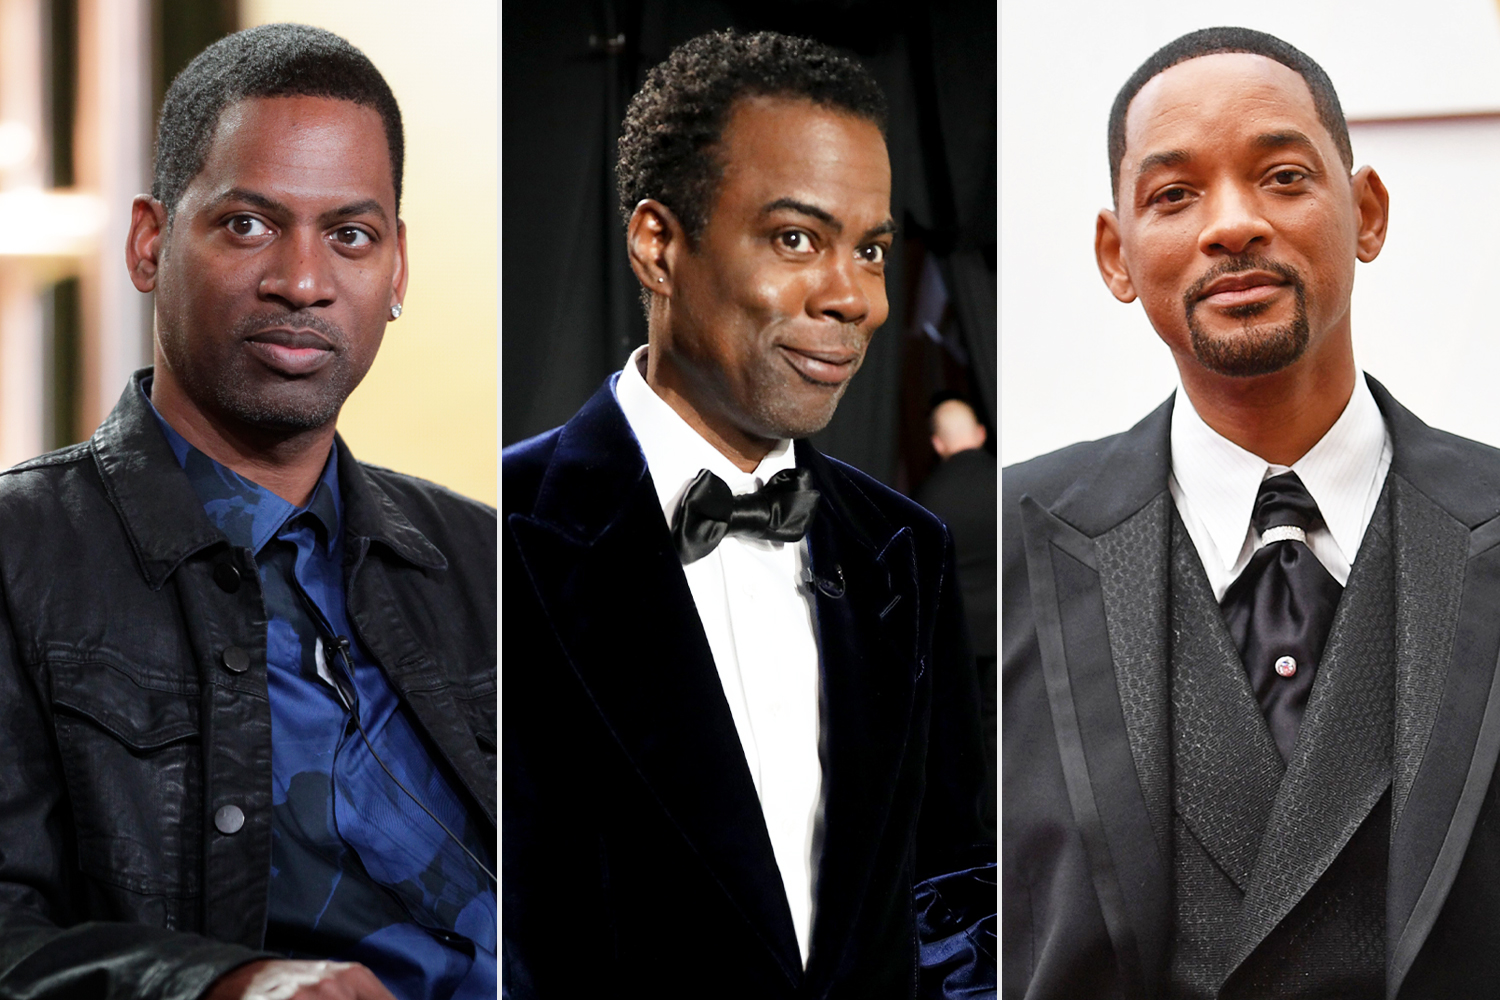 Chris Rock's Brother Tony Rock References Will Smith's Oscars Slap During Stand-Up Routine